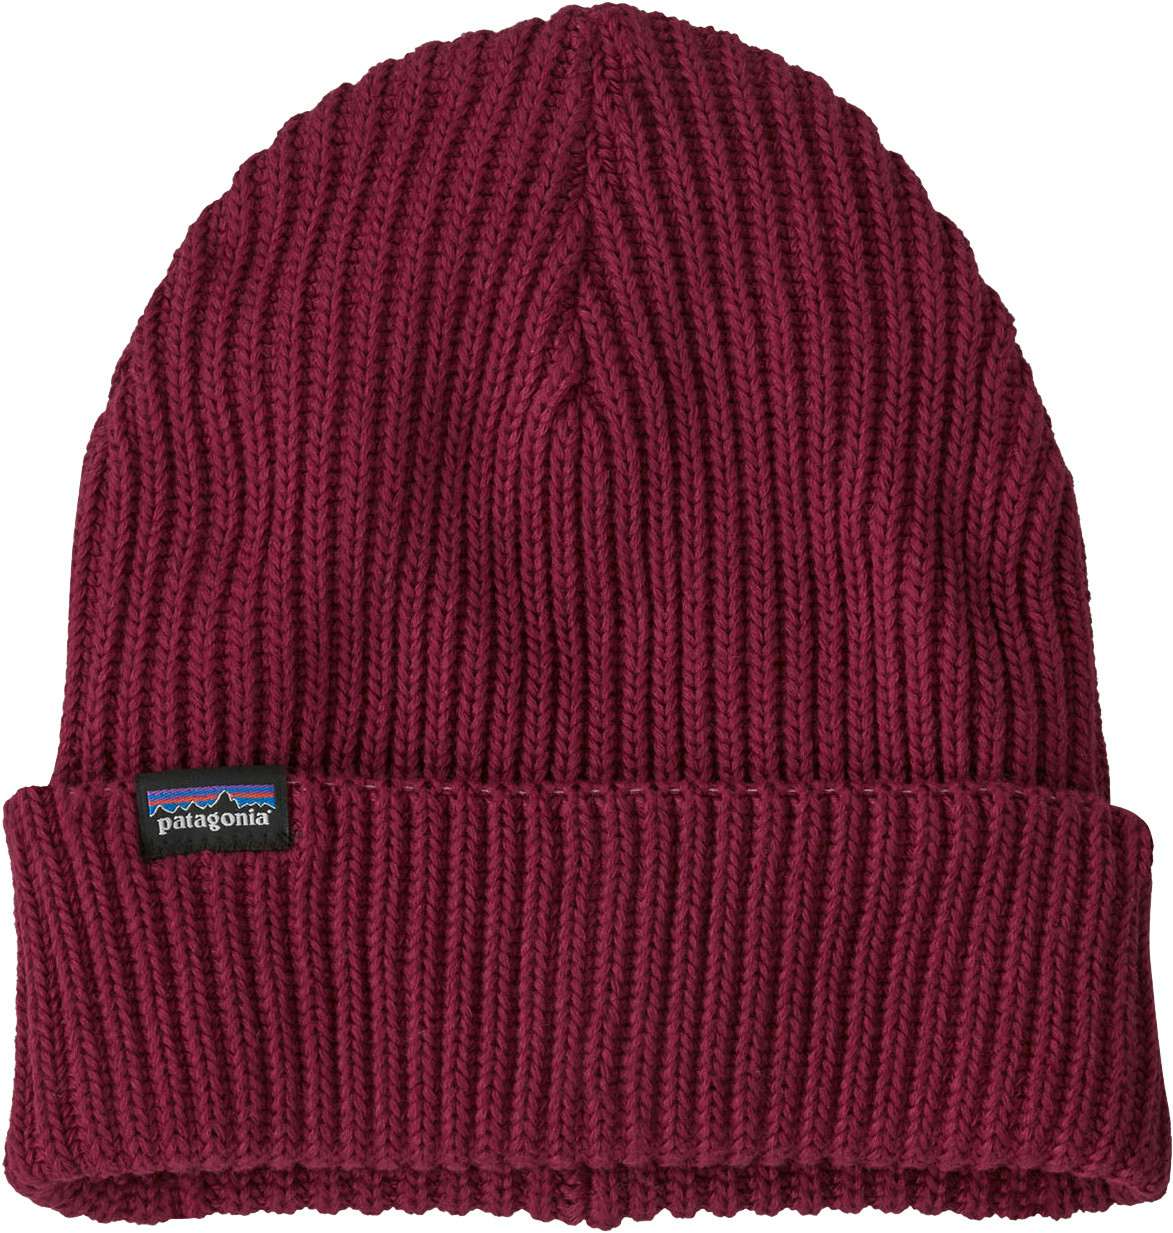 Tuque Fisherman's Rouge Cire